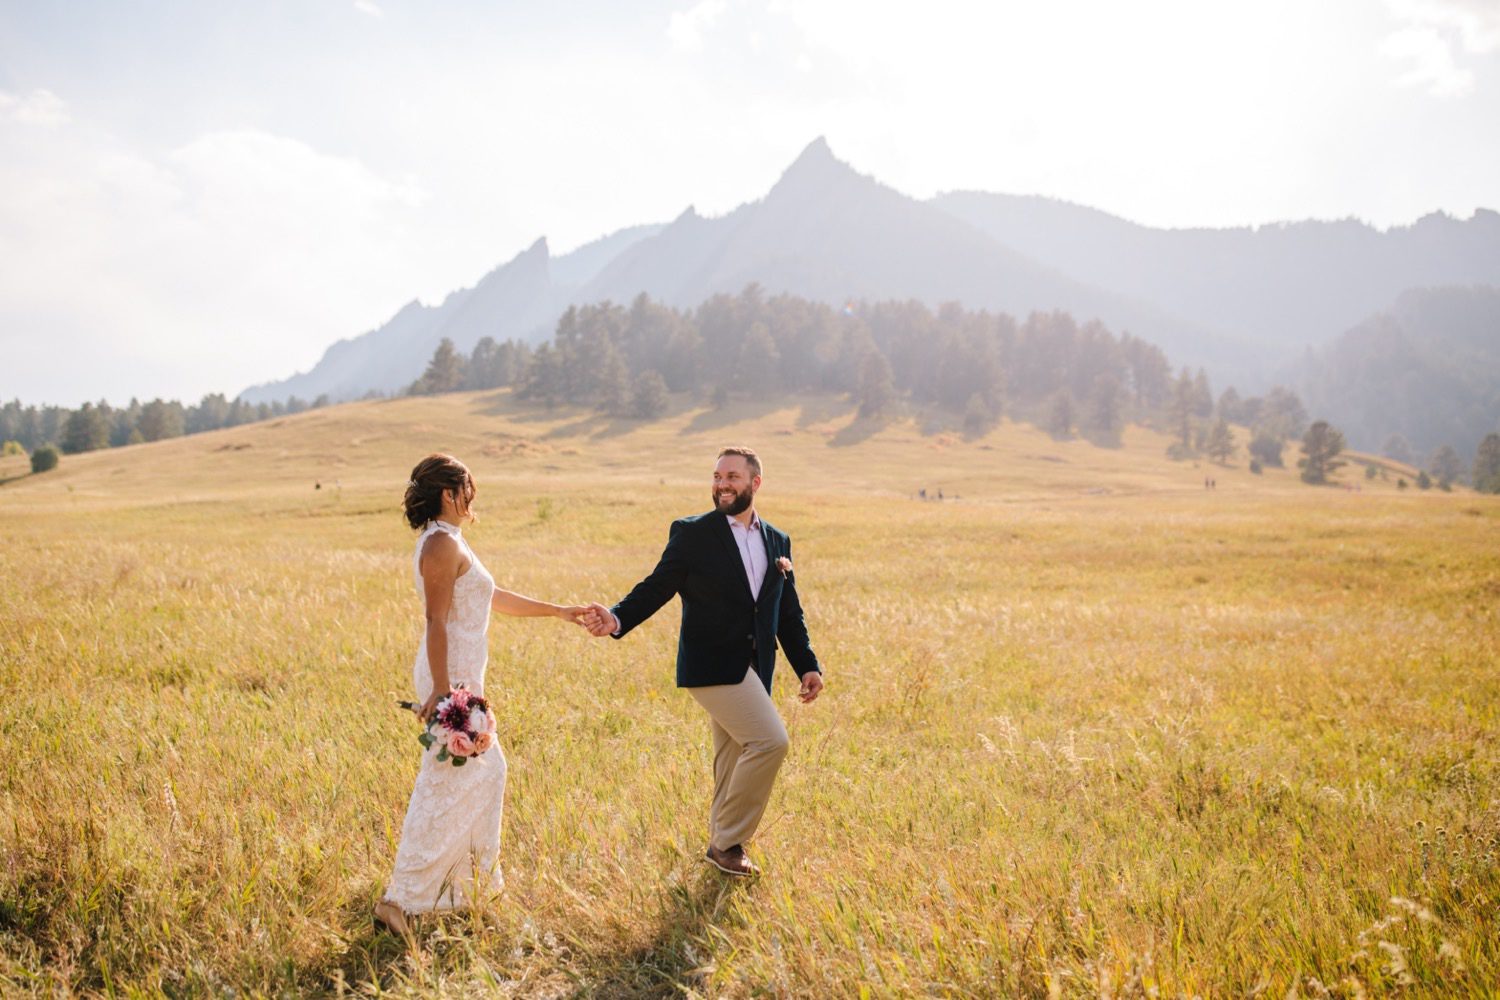 Colorado Elopement, Fall elopement, Elopement Photography, Eloping with kids, Eloping with family, Blended family elopement, Boulder Elopement, Chautauqua Park Elopement, Boulder Flatirons, Rocky Mountain Elopement, Boulder Elopement Photographer, Colorado Elopement Photographer, Elopement inspiration, Elopement ideas, Mountain Elopement, Micro wedding, Intimate wedding, small wedding, wedding photography, elopement planning, Colorado, Elopement